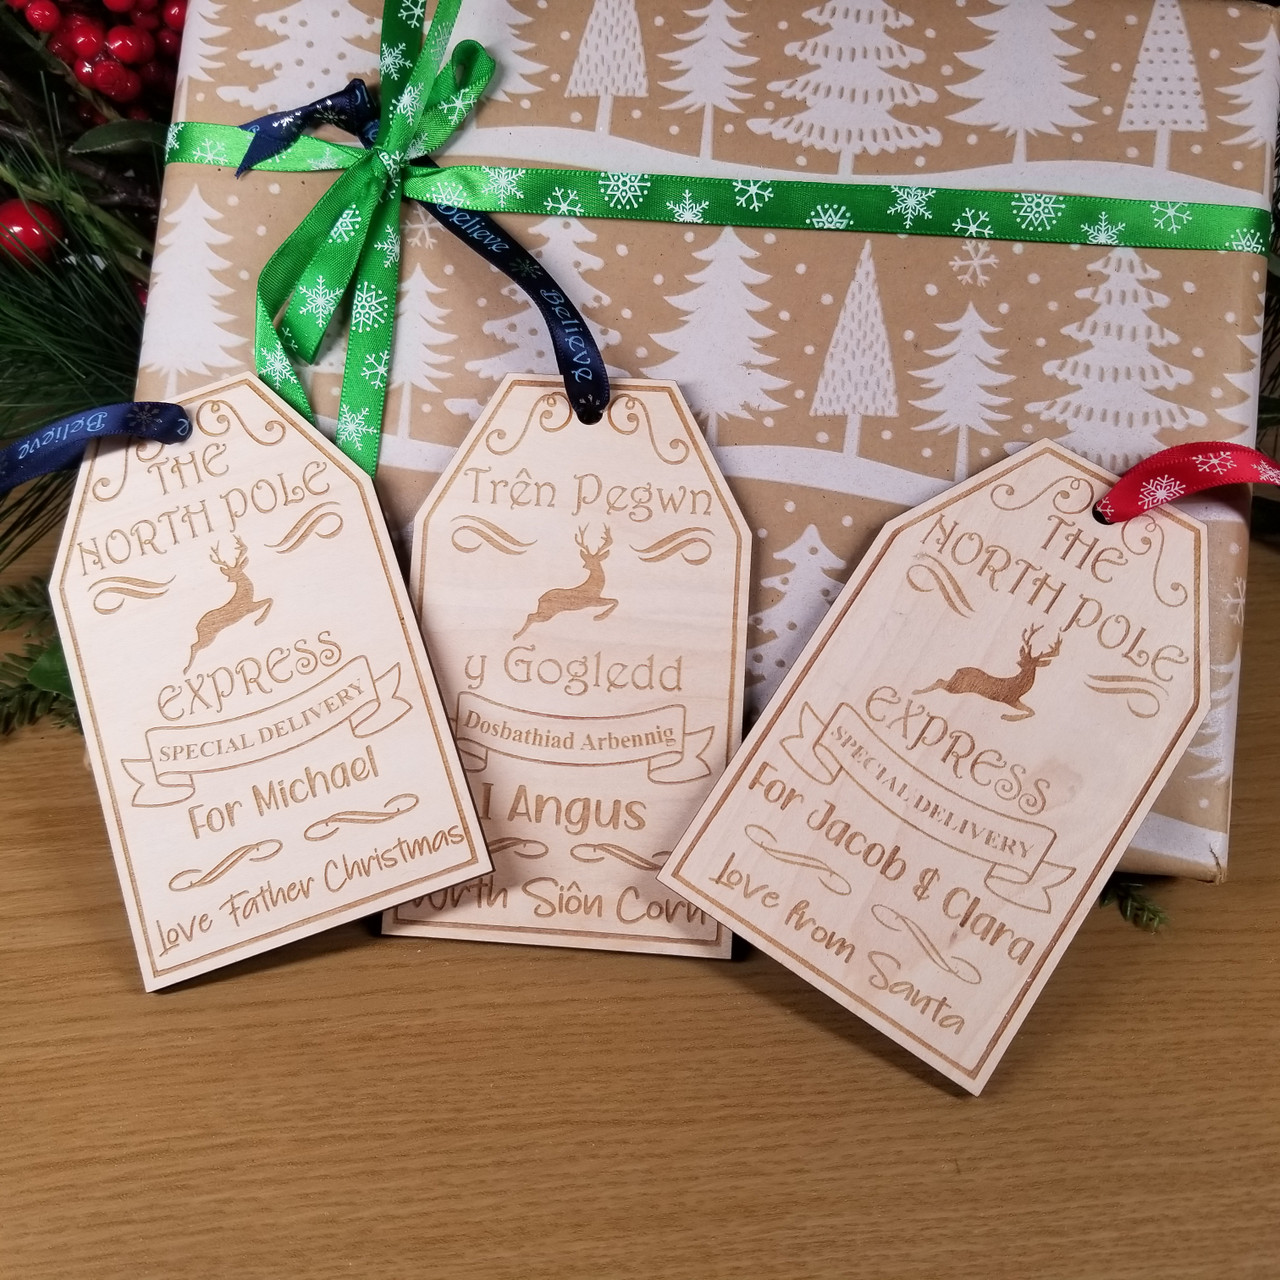 16 PERSONALISED CHRISTMAS Luggage Labels Name Gift Tags Vintage Tartan Stag  xmas £3.30 - PicClick UK